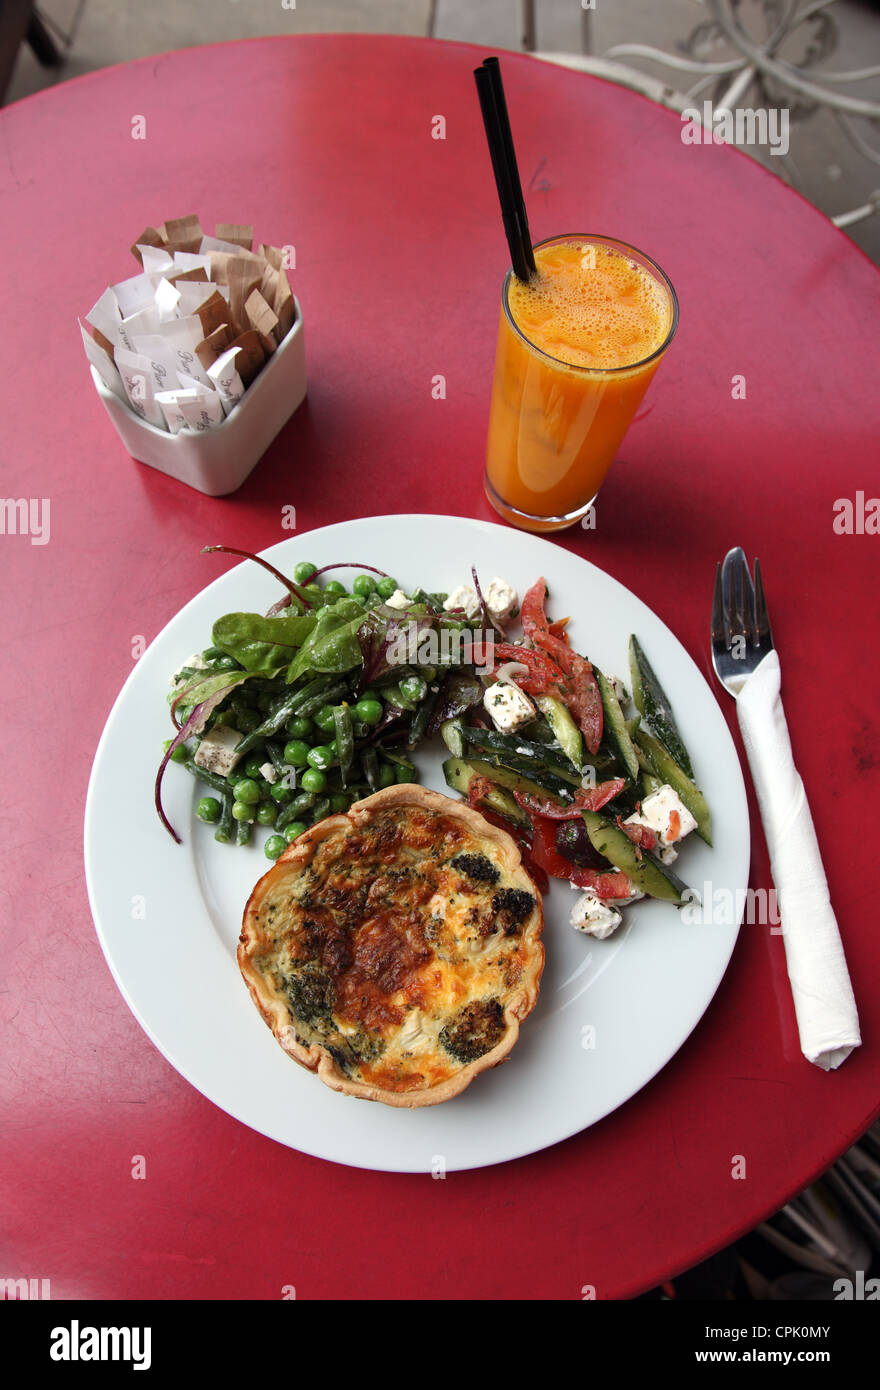 Healthy lunch of broccoli quiche, salads and fresh orange juice, Blanche cafe, Kensington, London Stock Photo